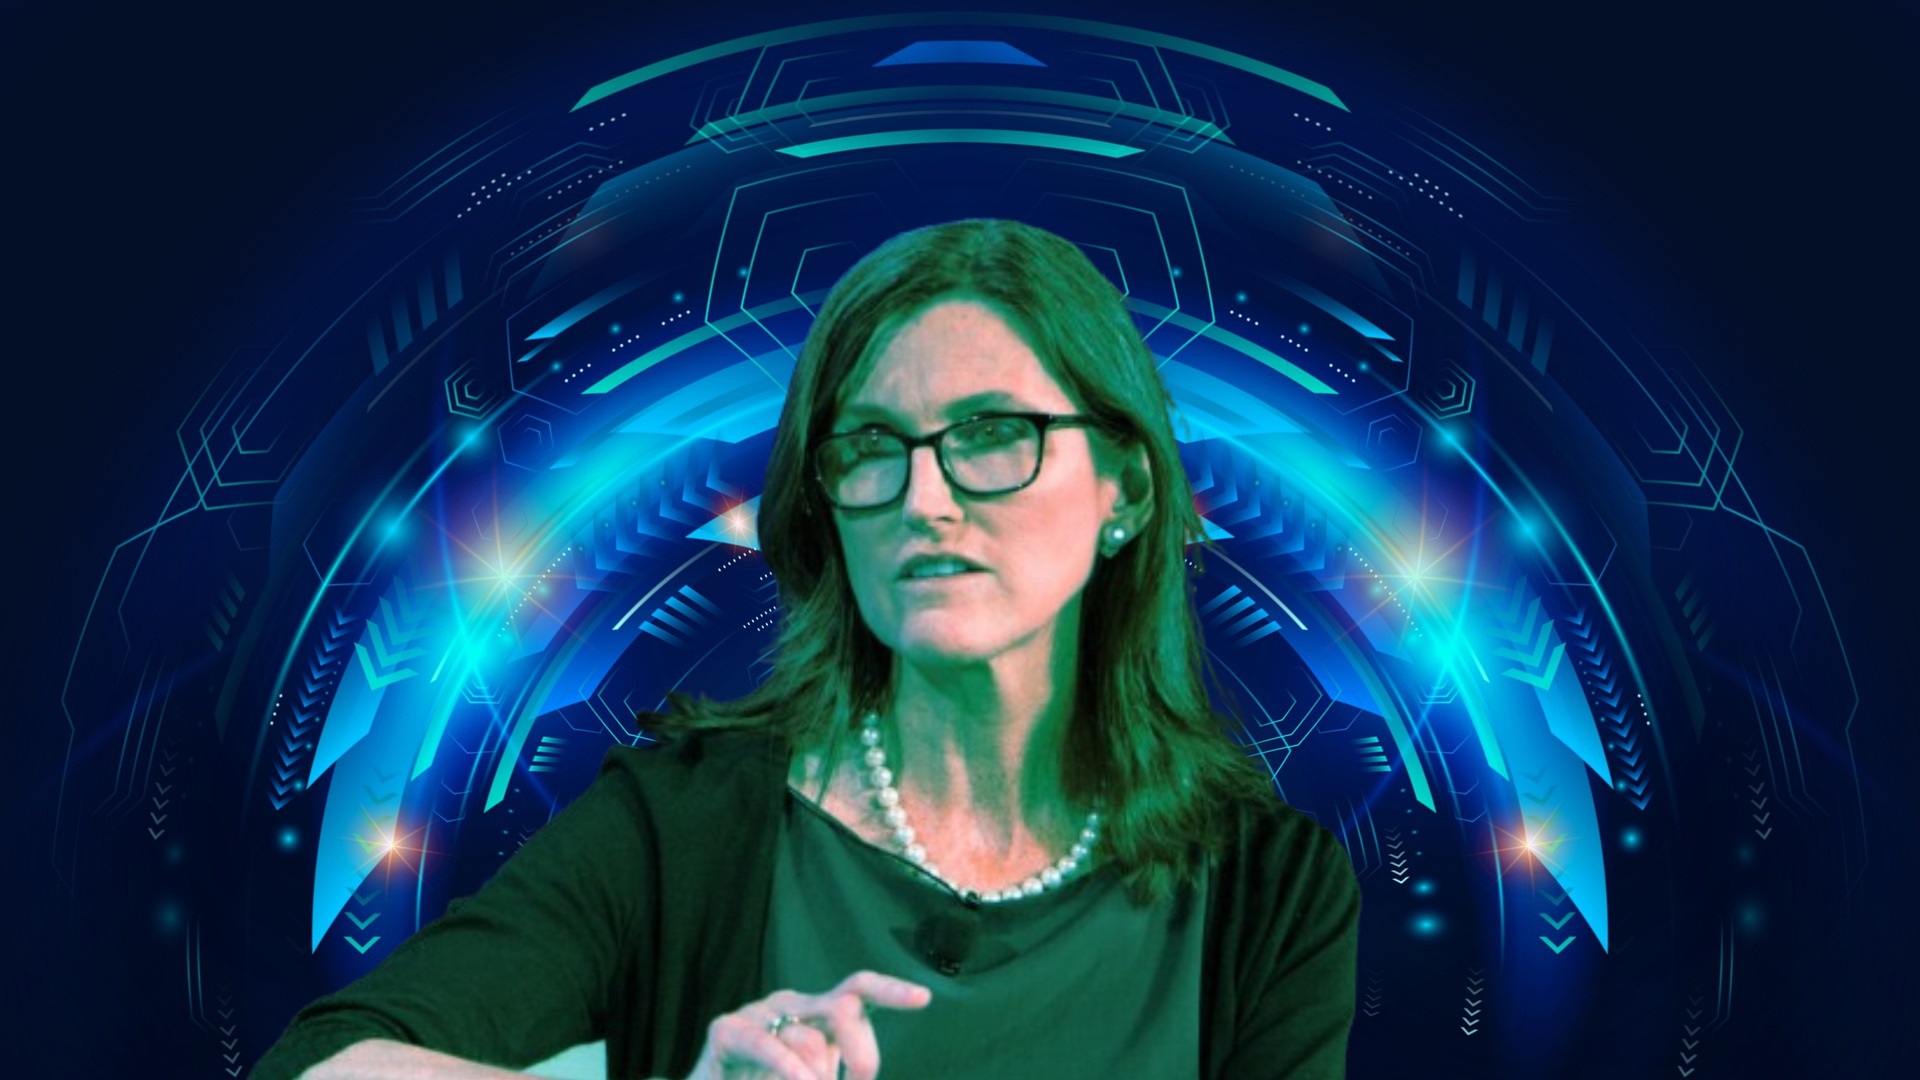 Top Woman in Tech Cathie Wood (CEO of ARK Invest) sparked debate after making $500k Bitcoin prediction, now ARK Cathie Wood predicts $1M BTC.